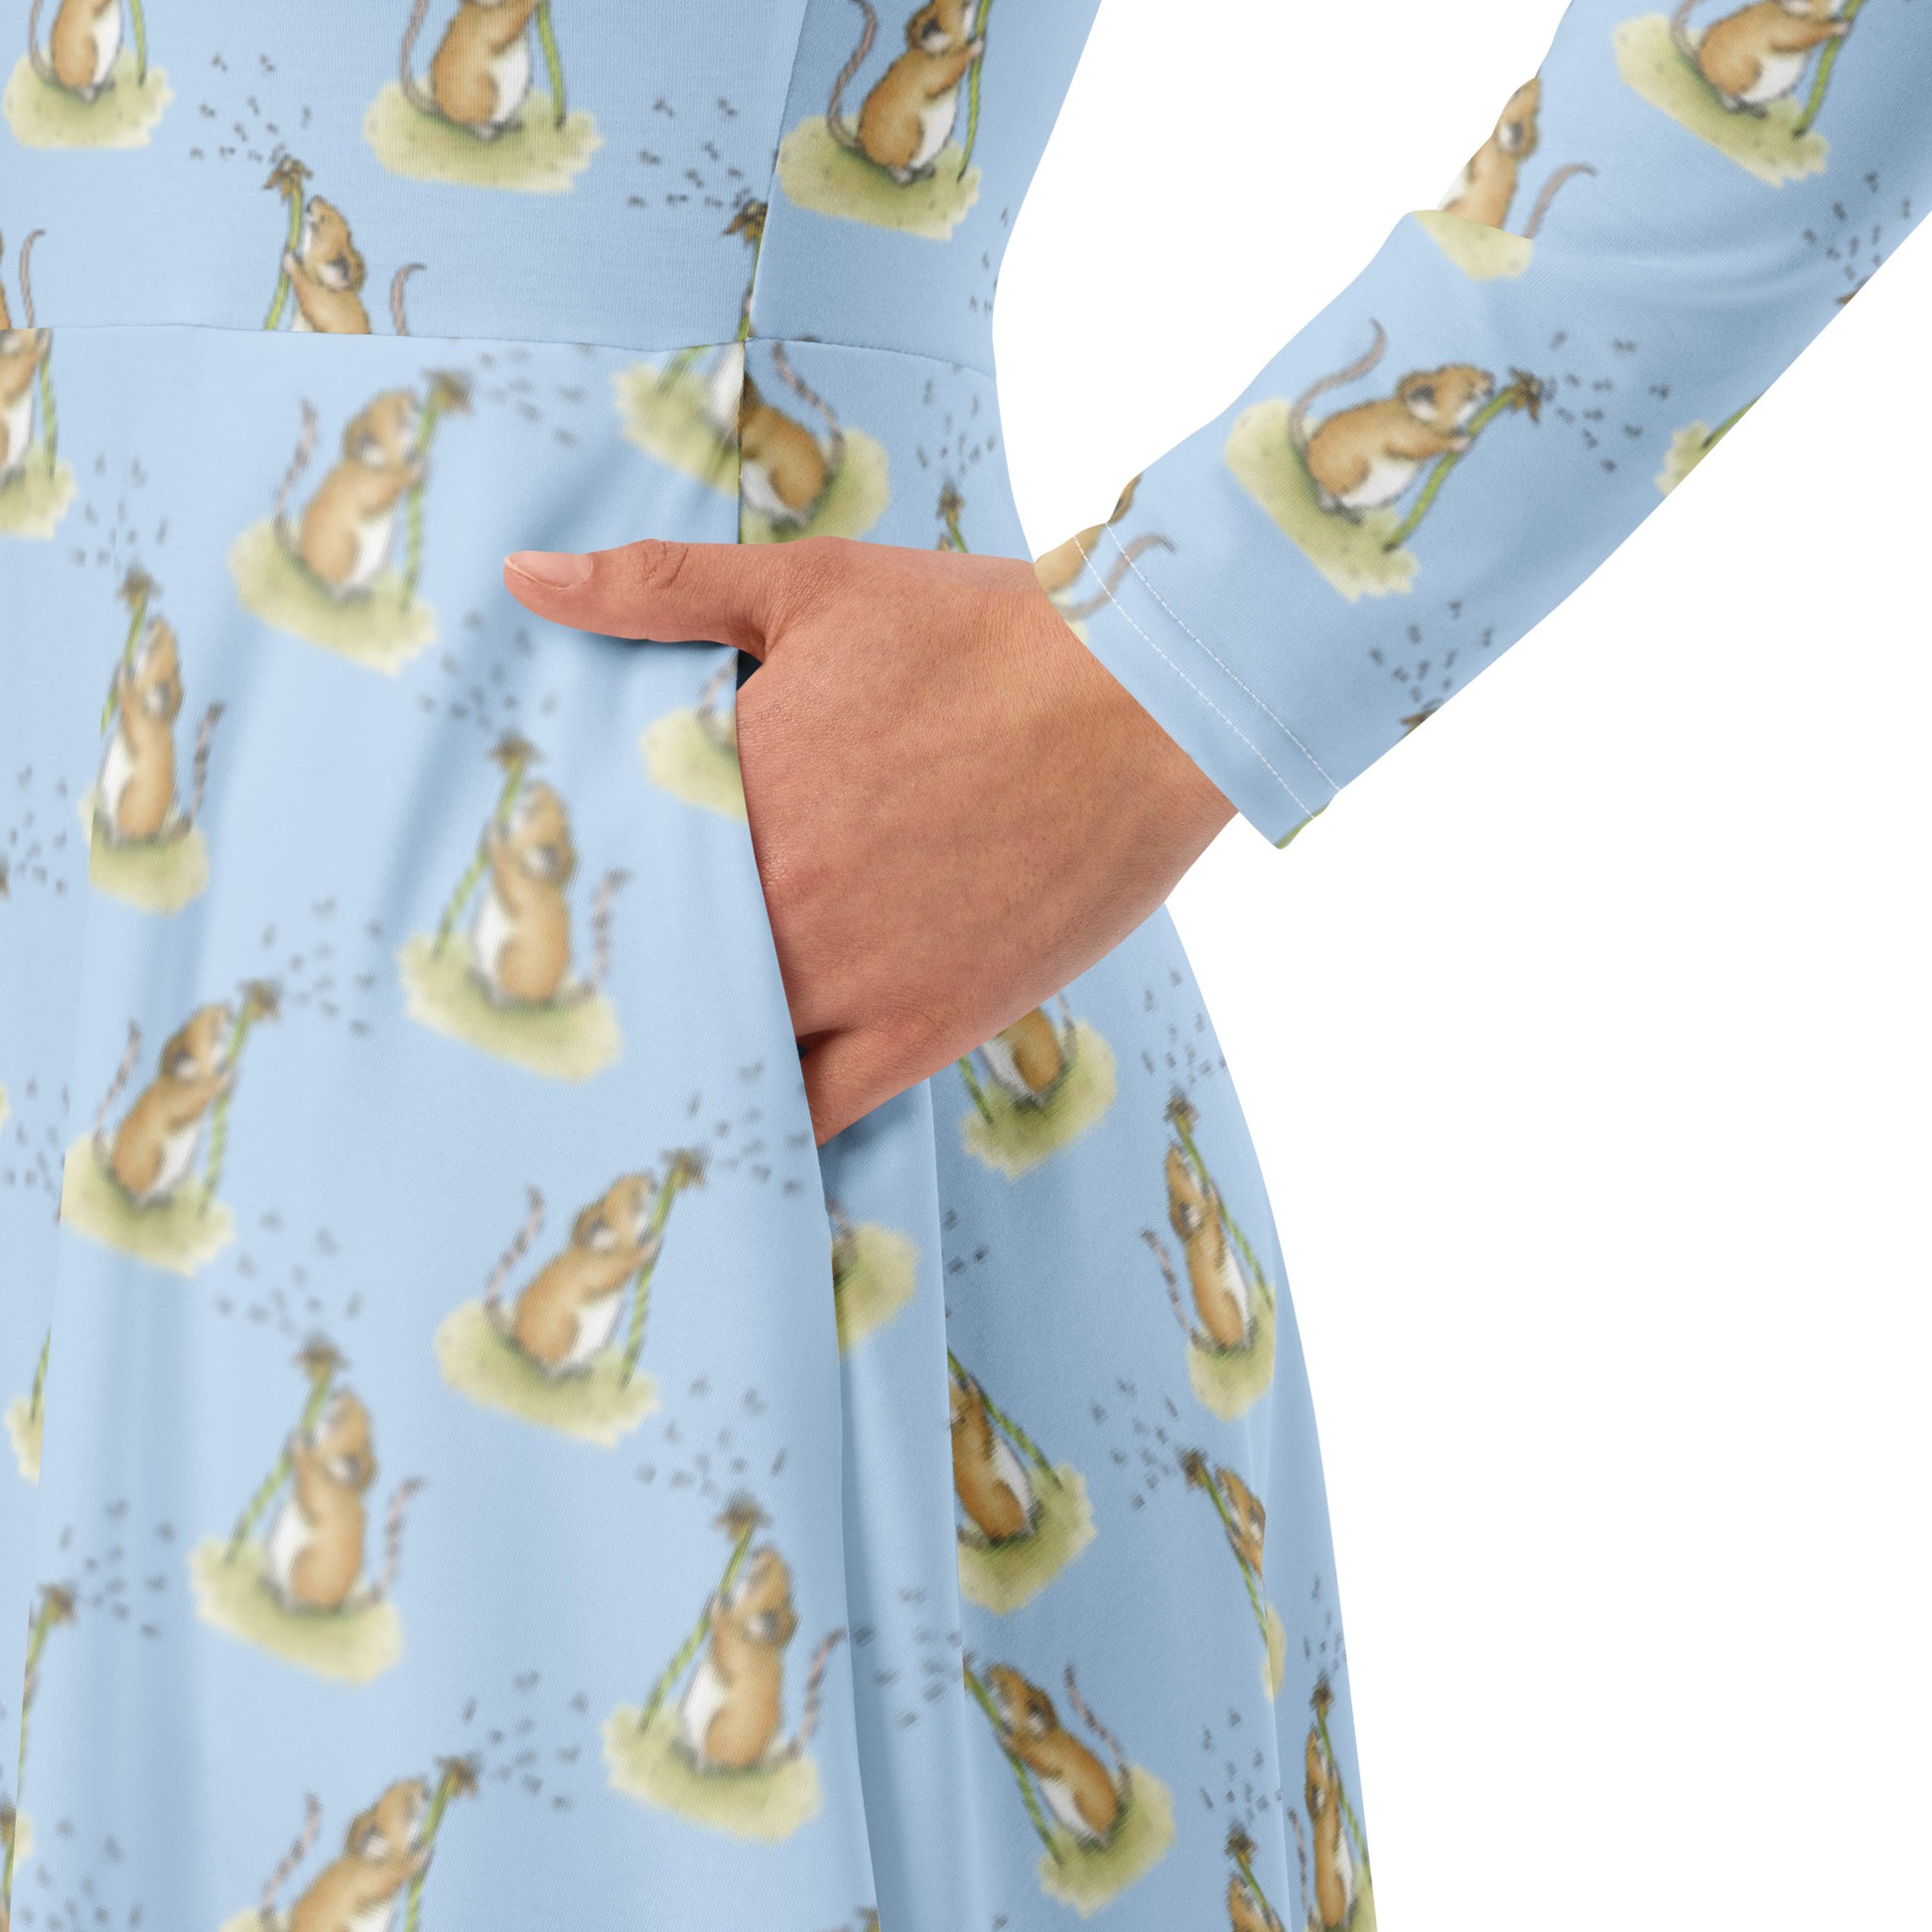 Dandelion Wish patterned long sleeve midi dress. Features patterned design of a mouse making a wish on a dandelion fluff against a light blue background. Dress has boat neckline, fitted waist, flared bottom, and side pockets. Detail image showing model's hand in side pocket.